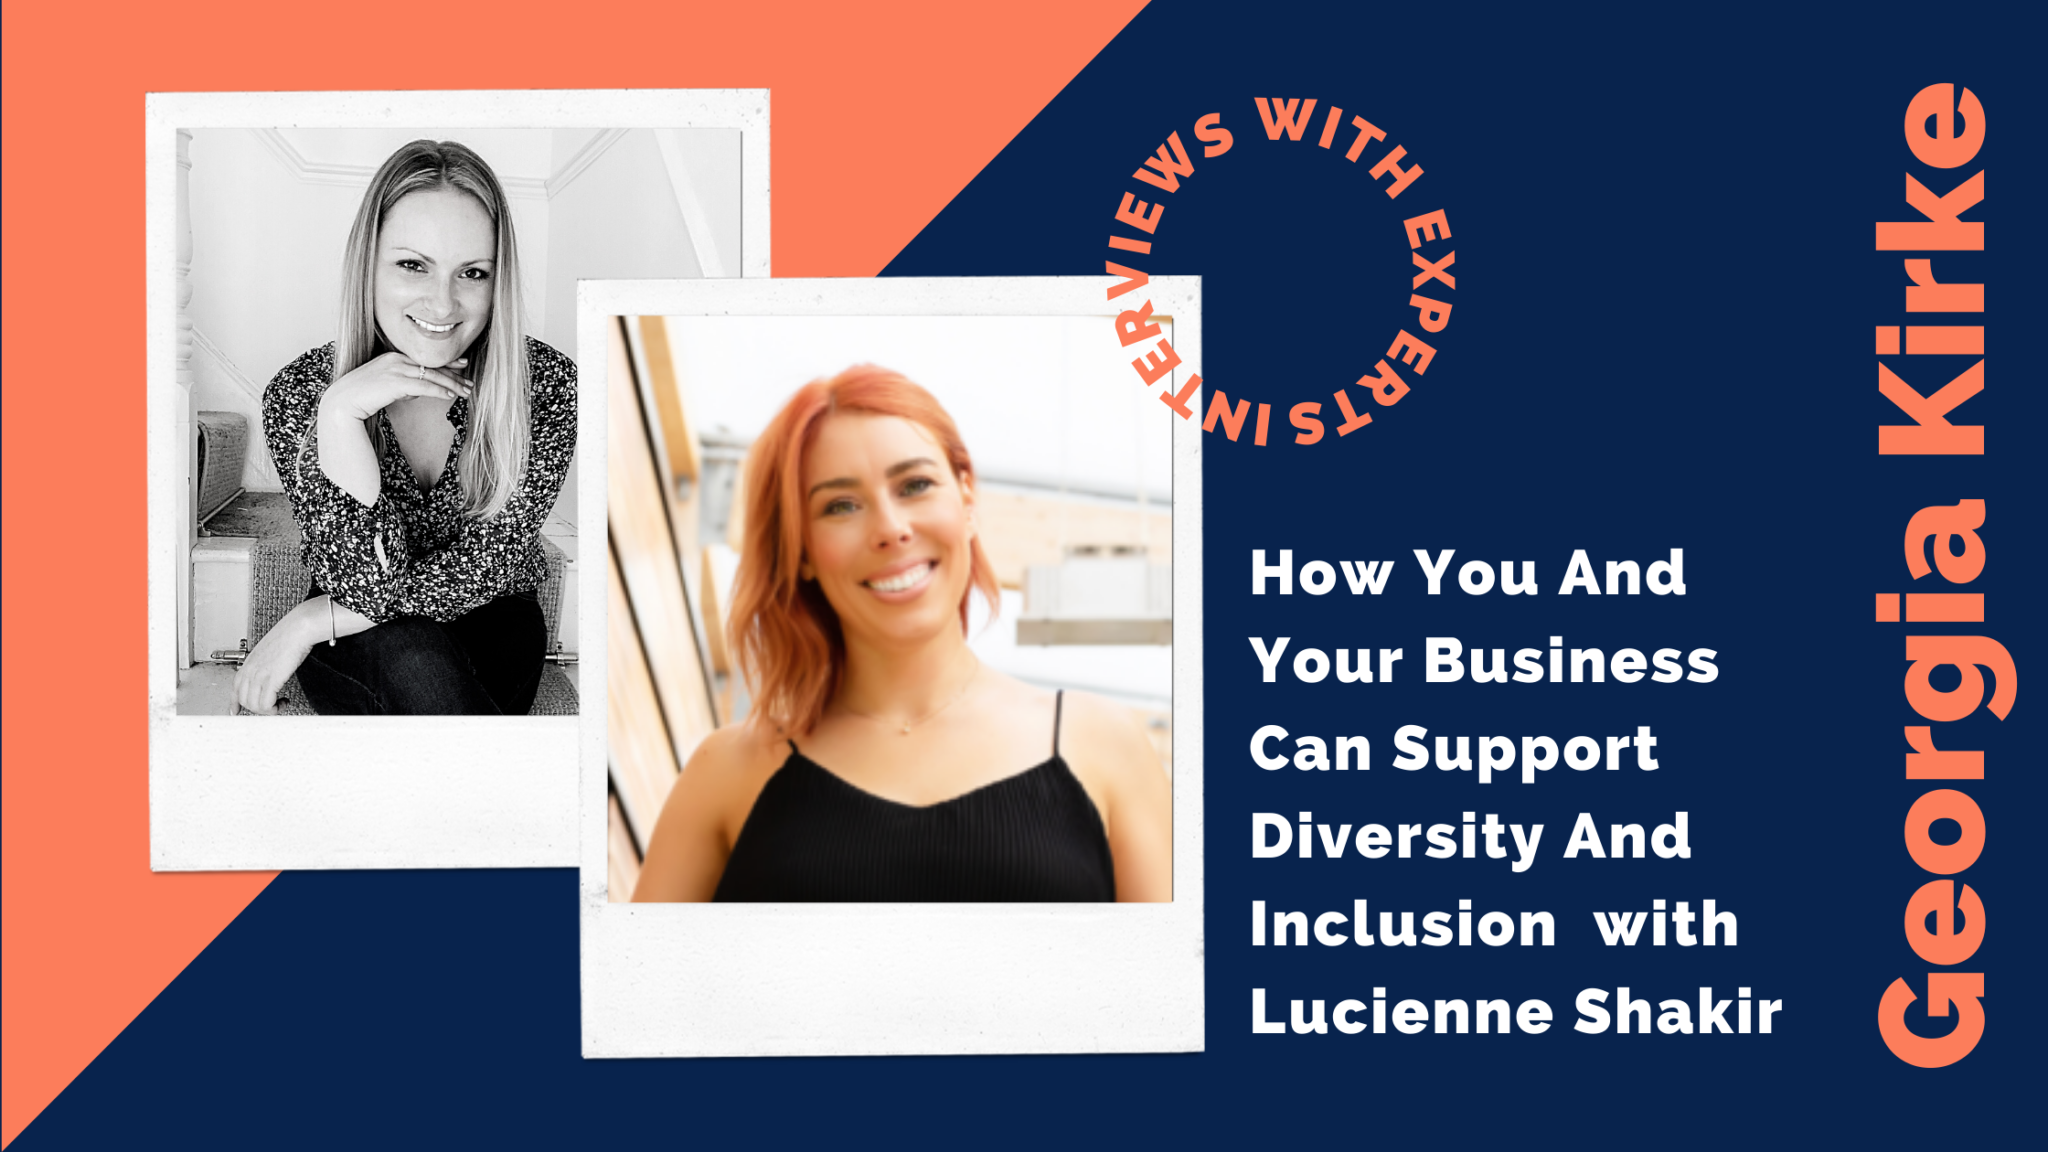 How You And Your Business Can Support Diversity And Inclusion By Georgia Kirke with special guest Lucienne Shakir